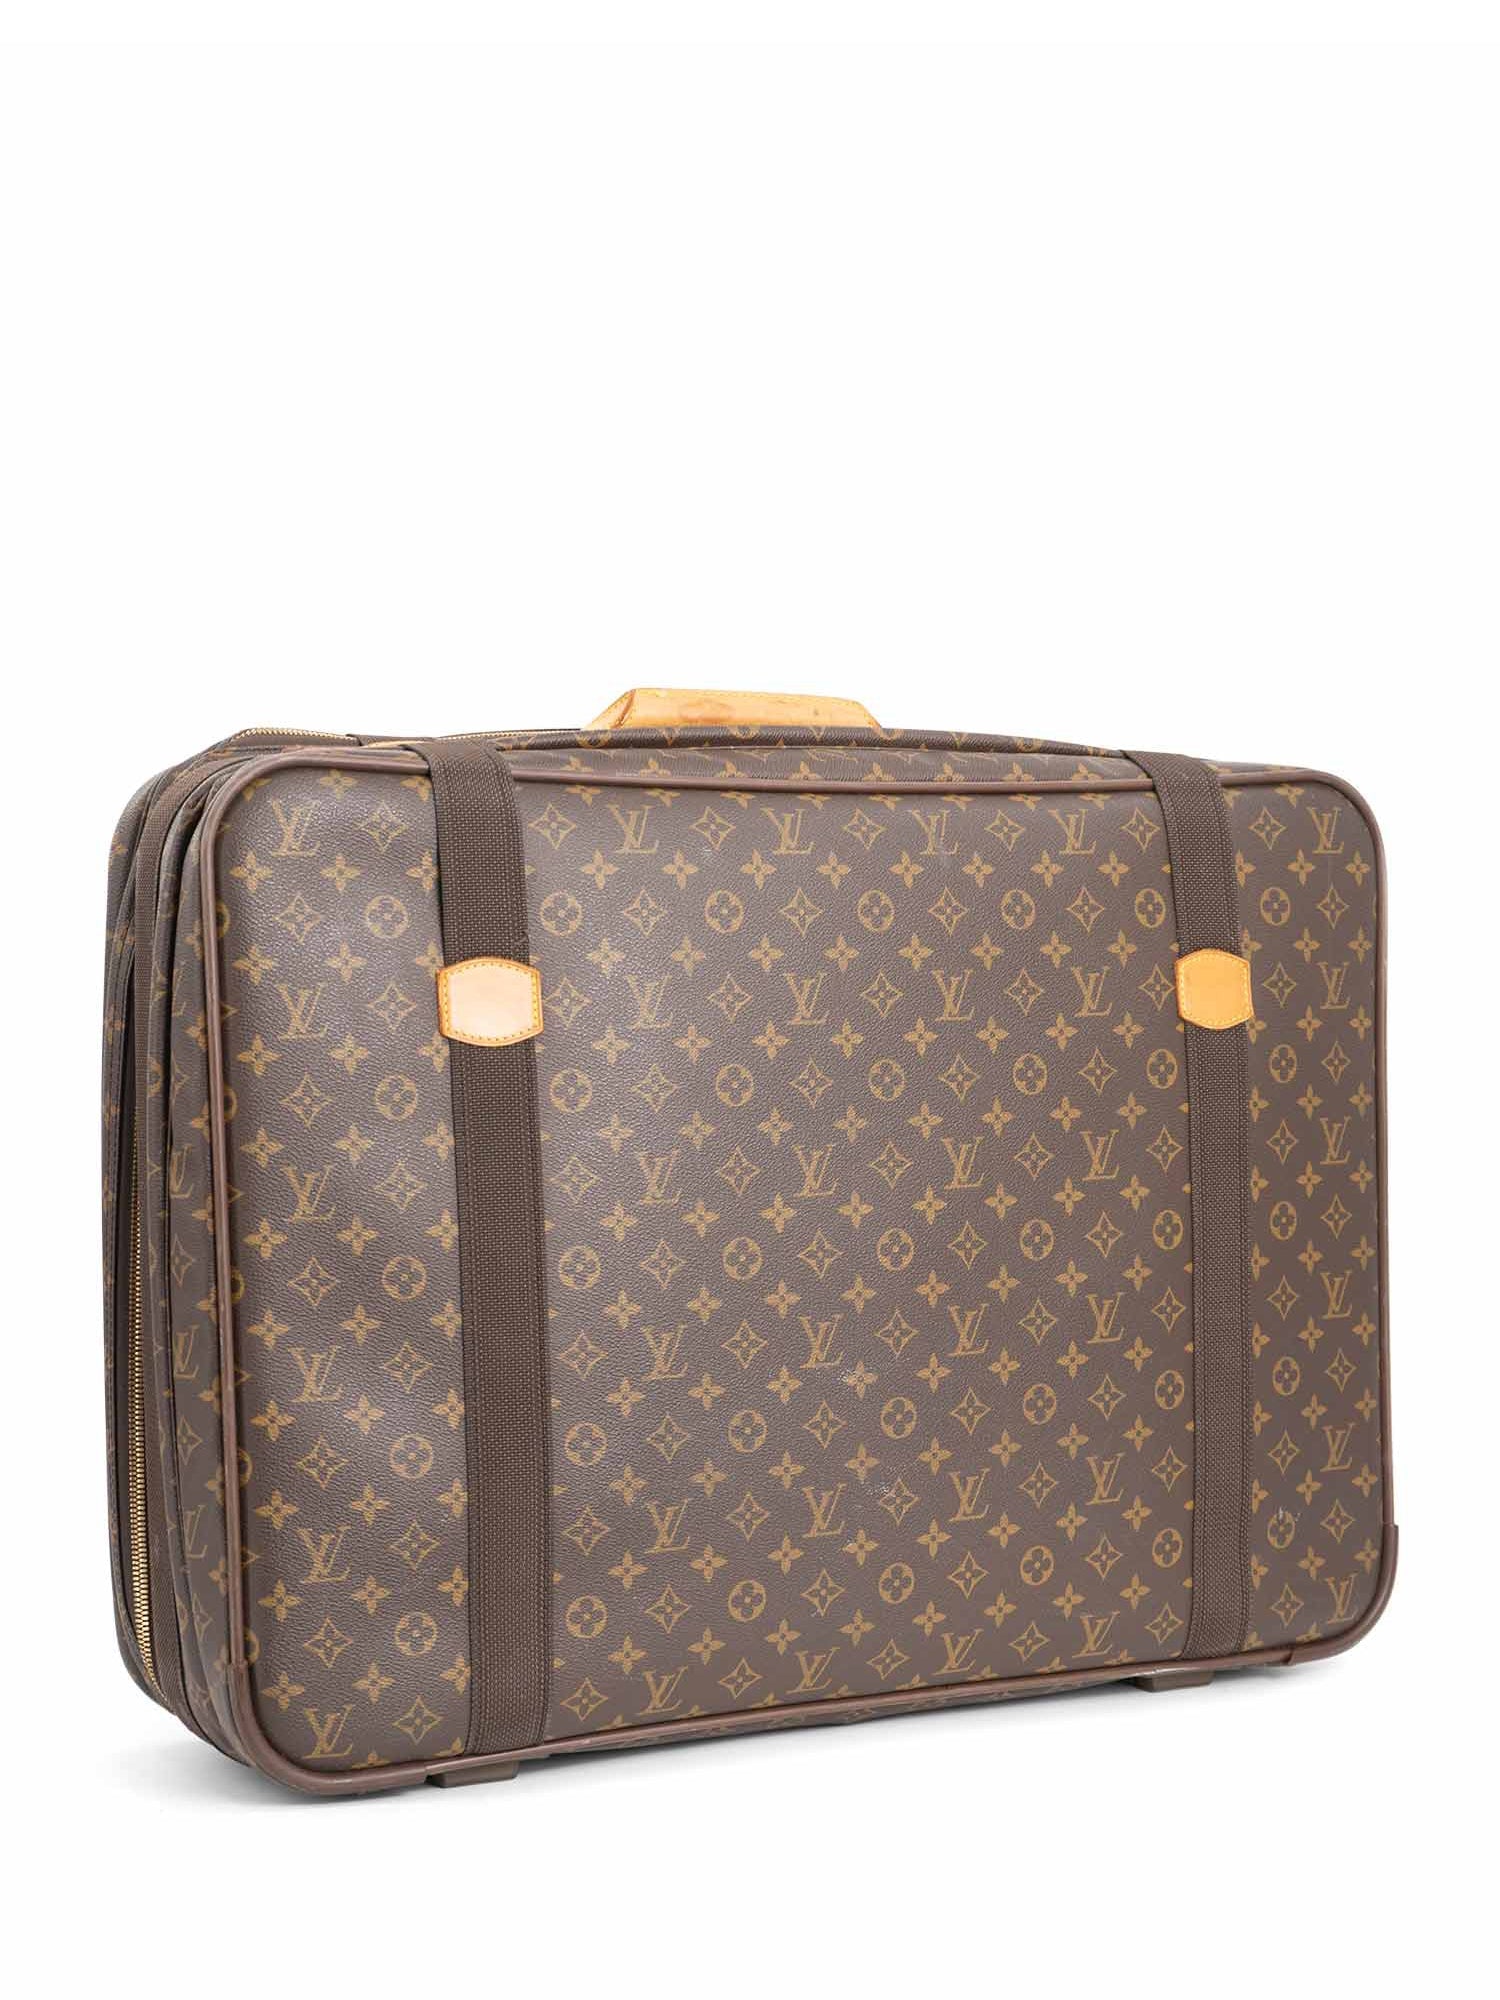 2023s It Bag Is Already Here Thanks to Louis Vuitton  Who What Wear